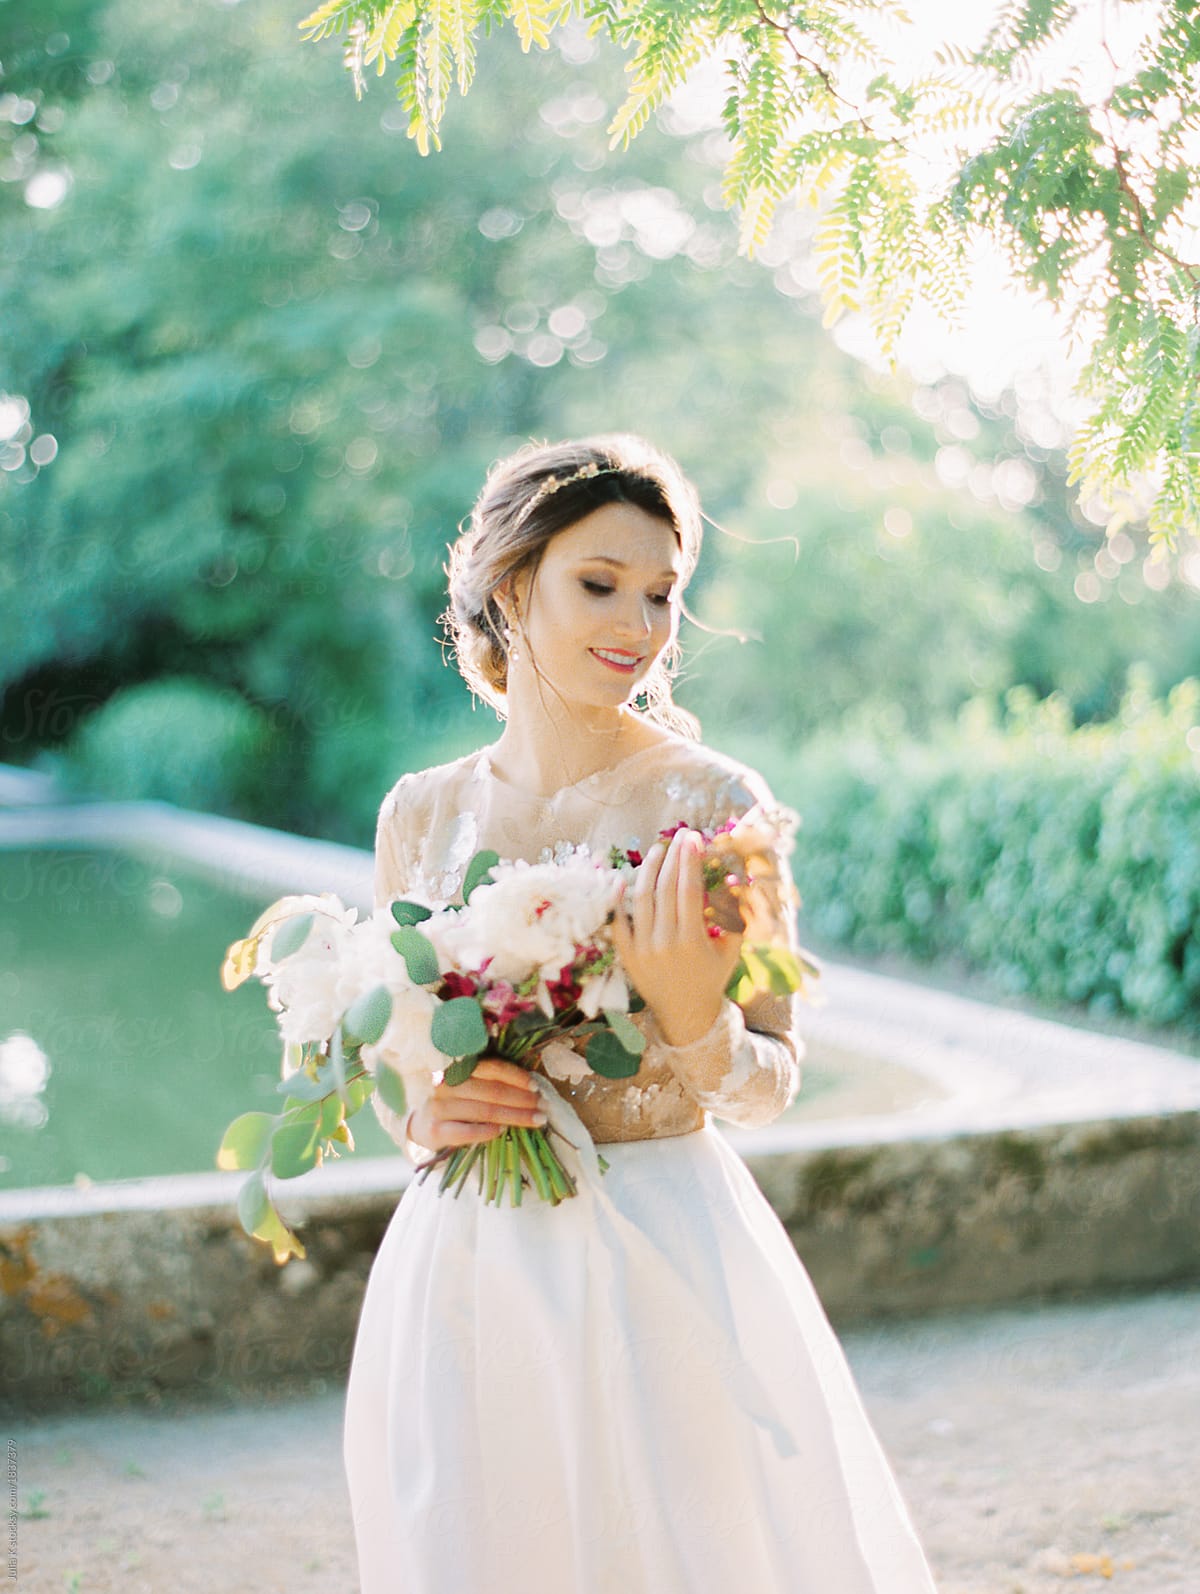 Young bride with bunch of flowers